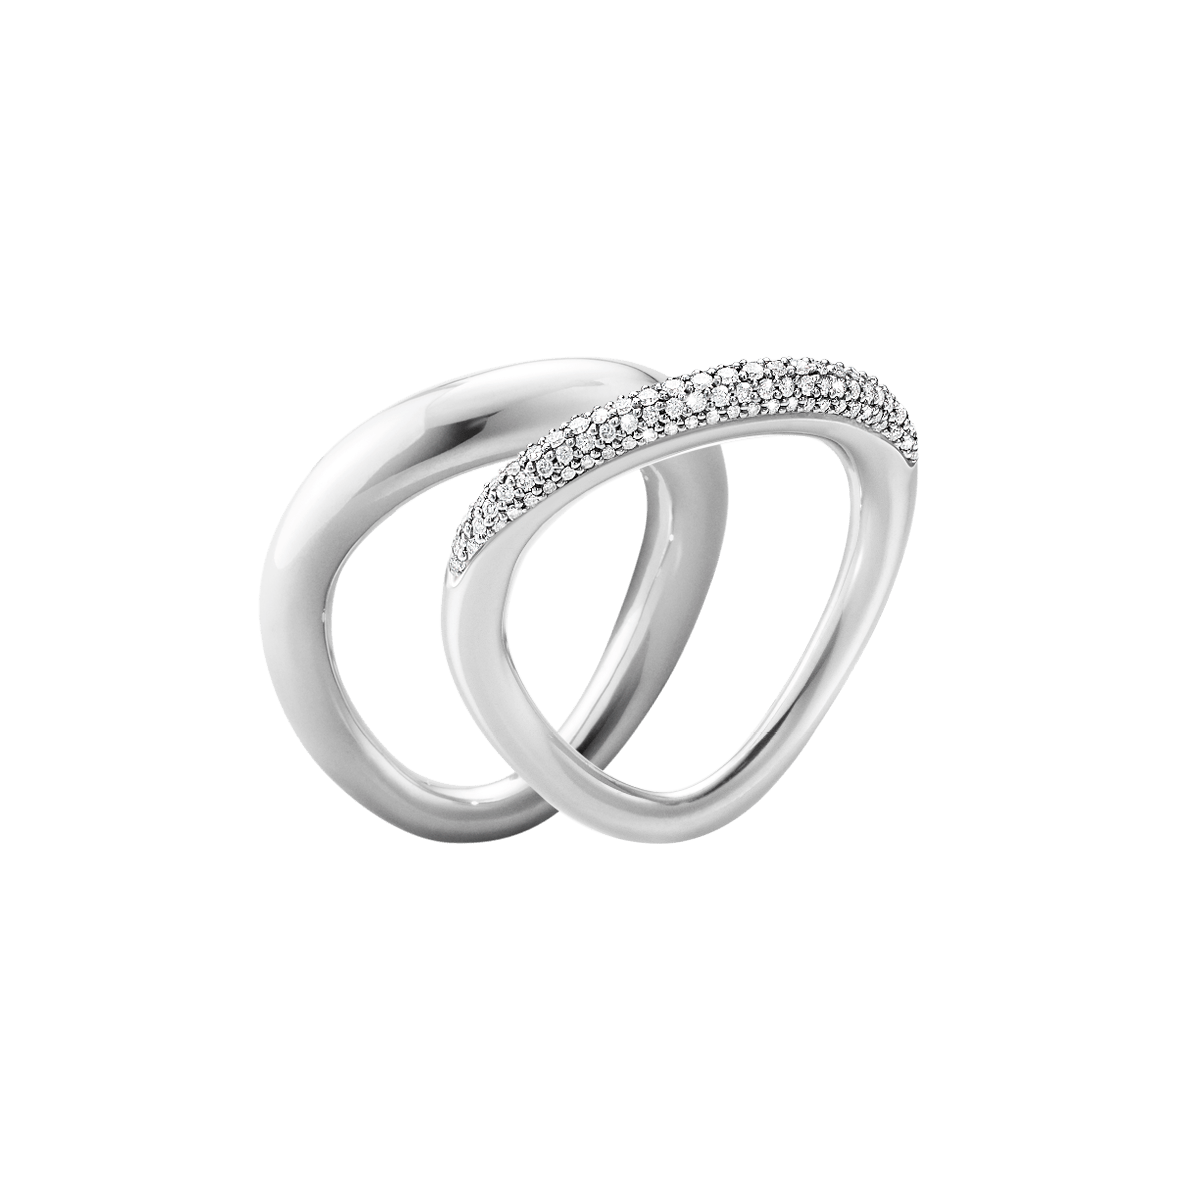 Offspring sterling silver with diamonds ring combination | Georg 